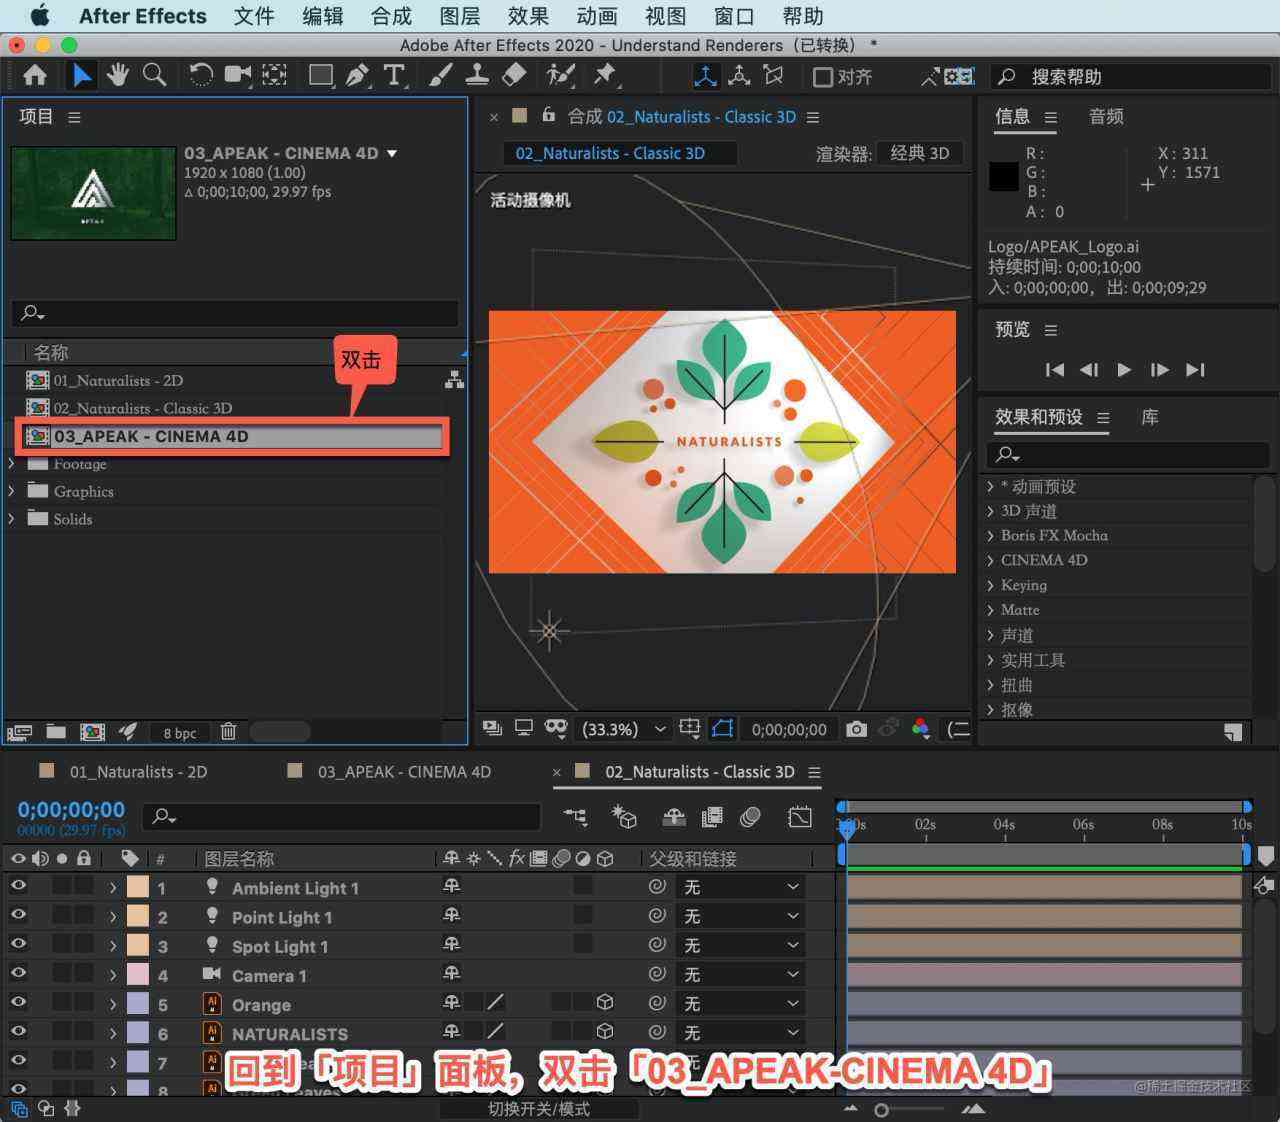 After Effects 教程，如何在 After Effects 中使用 Cinema 4D 渲染器？